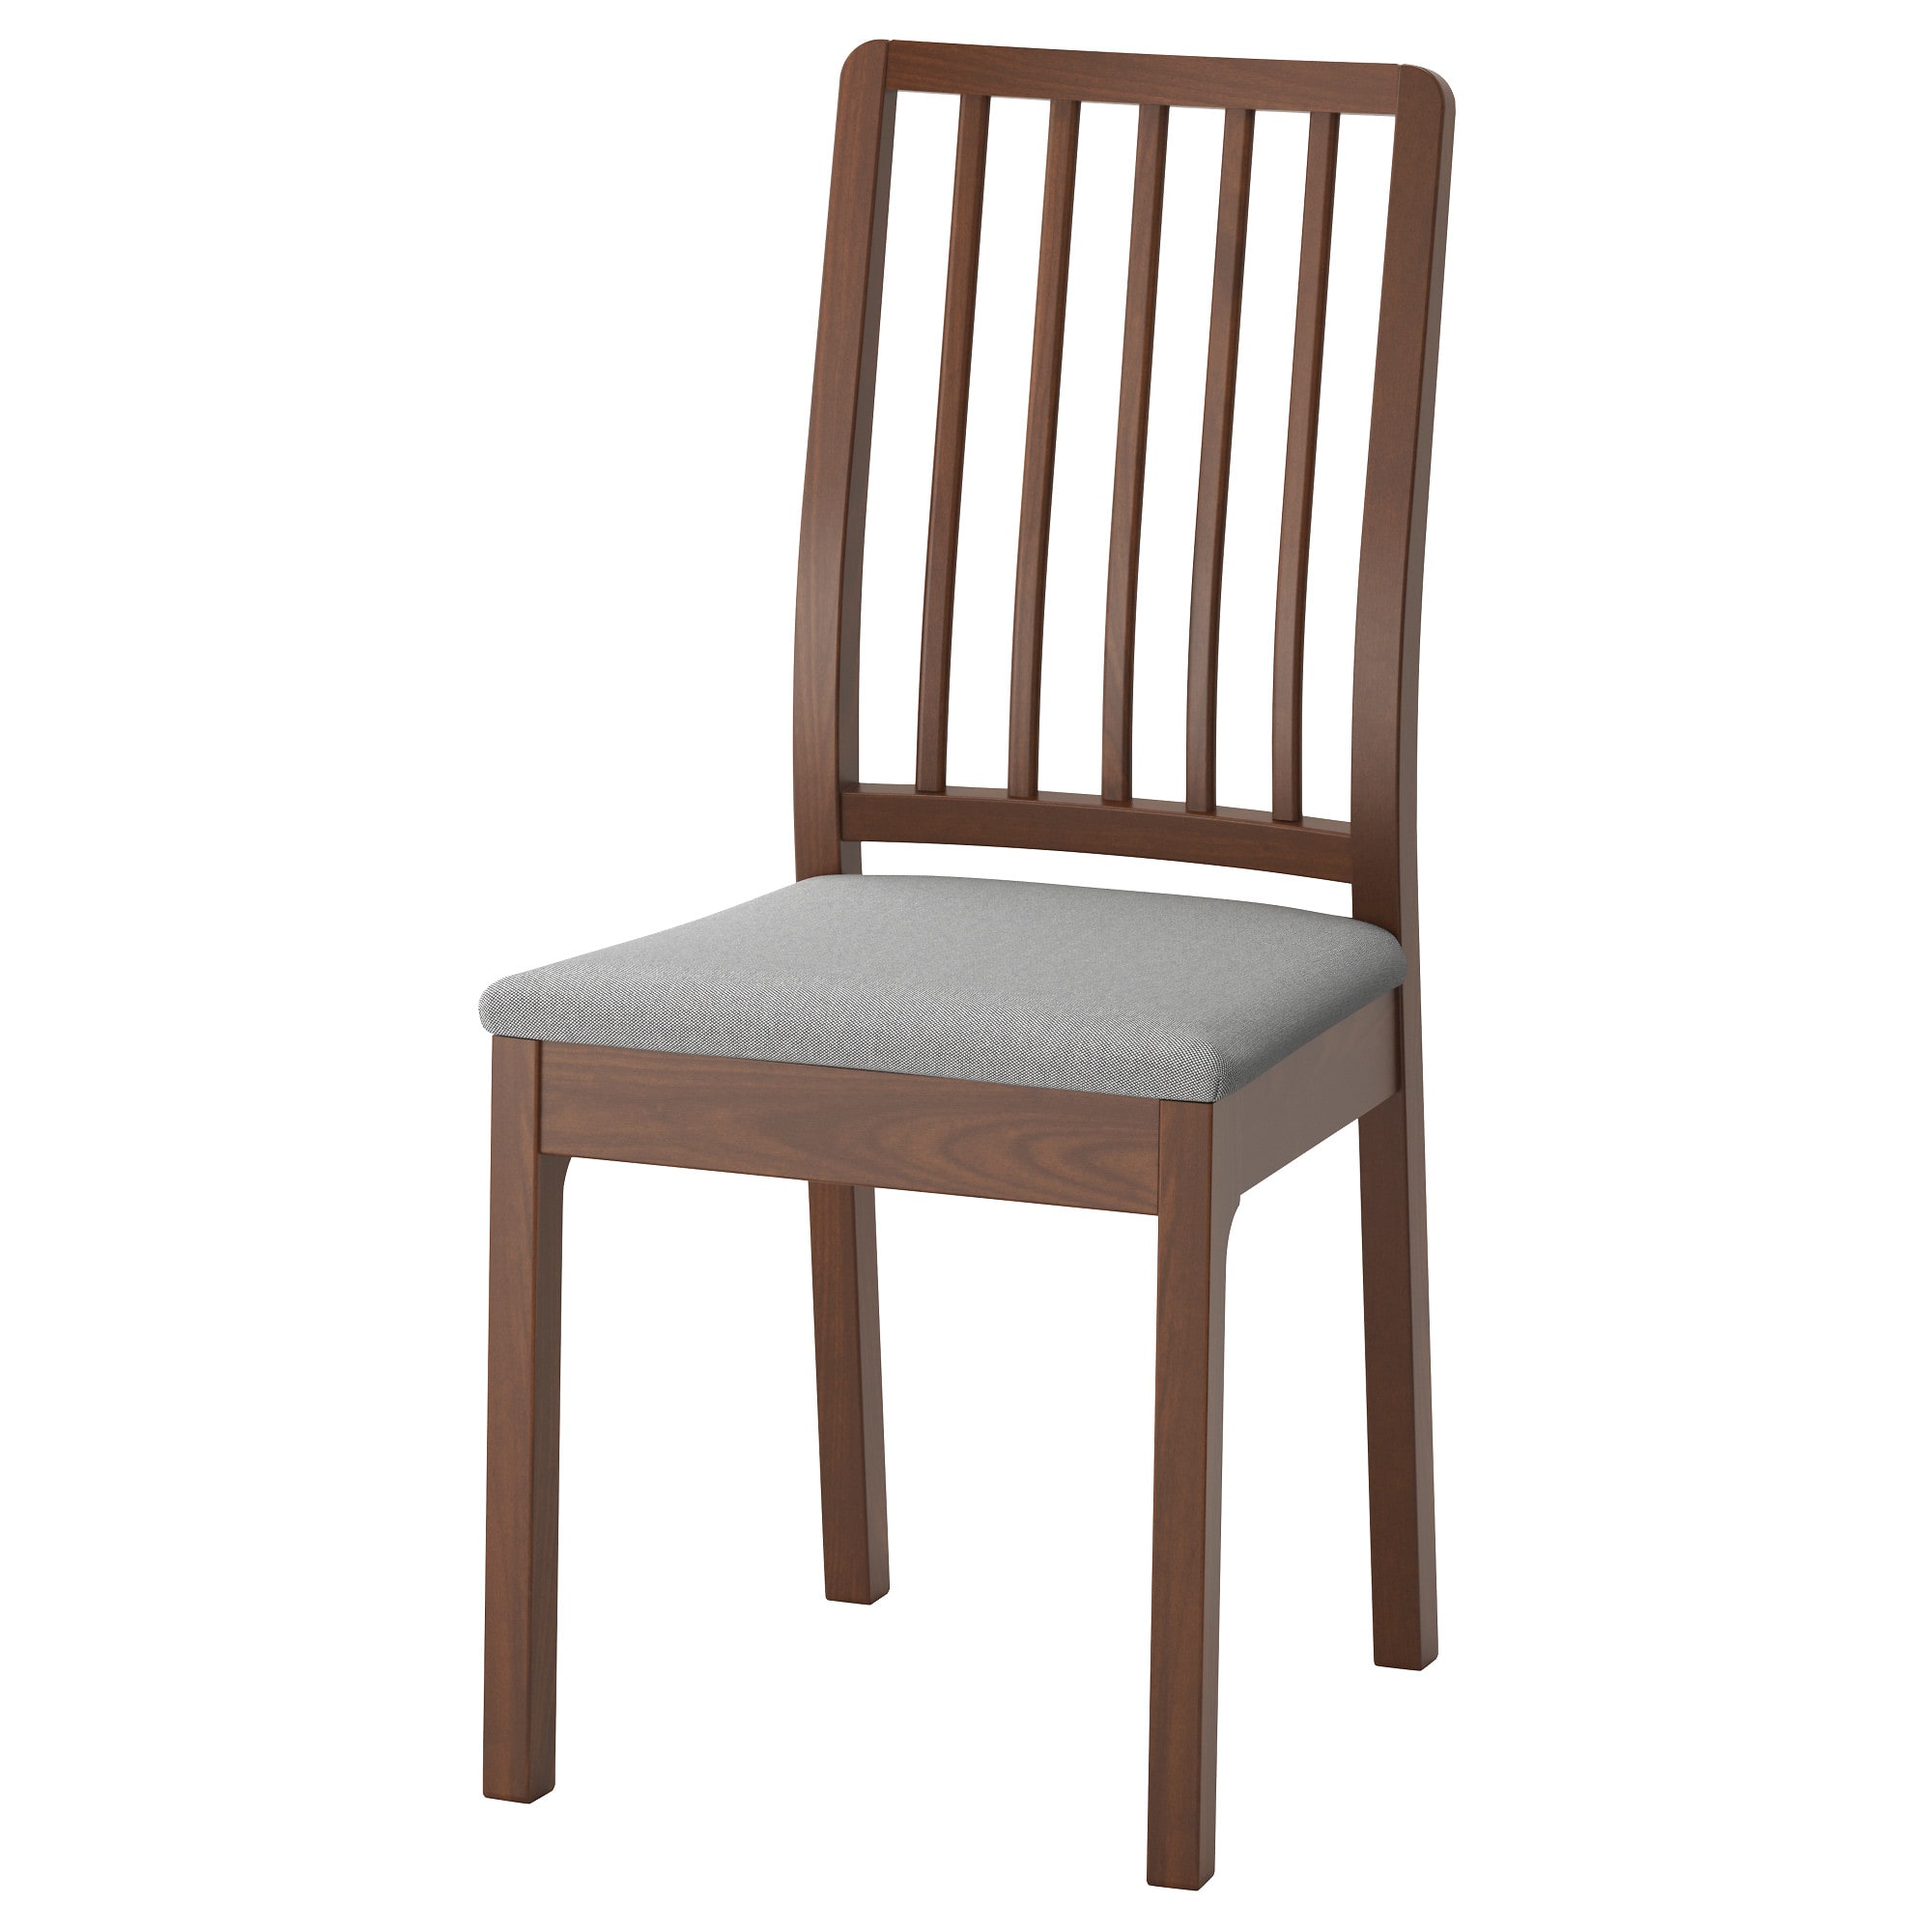 60341020 Ekedalen Dining Chairs IKEA khmer in phnom penh cambodia